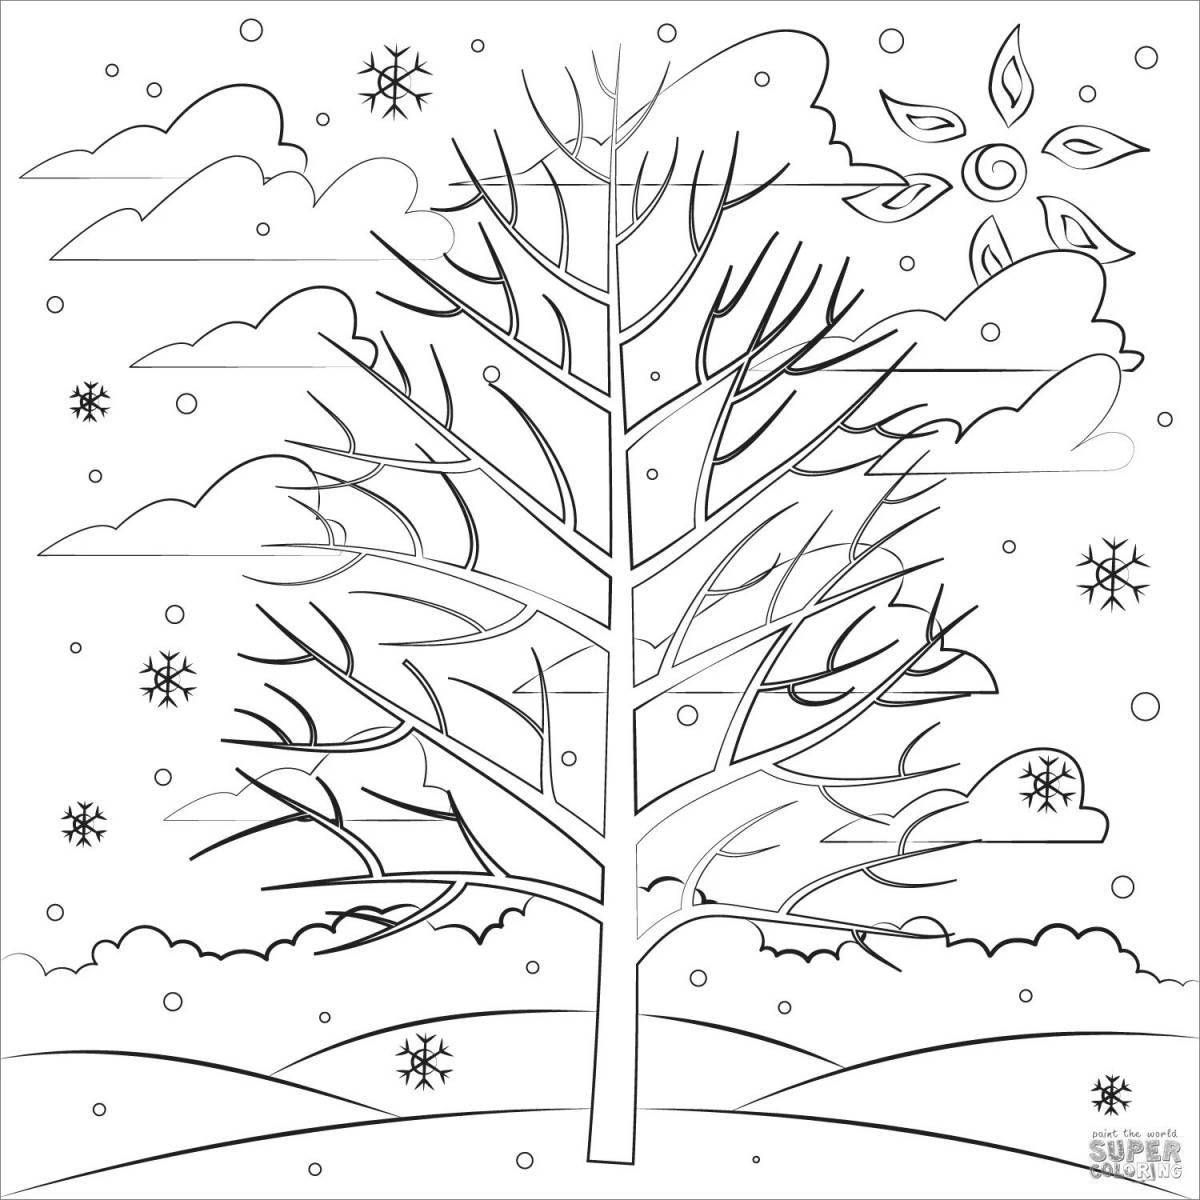 Royal frost on trees for kids